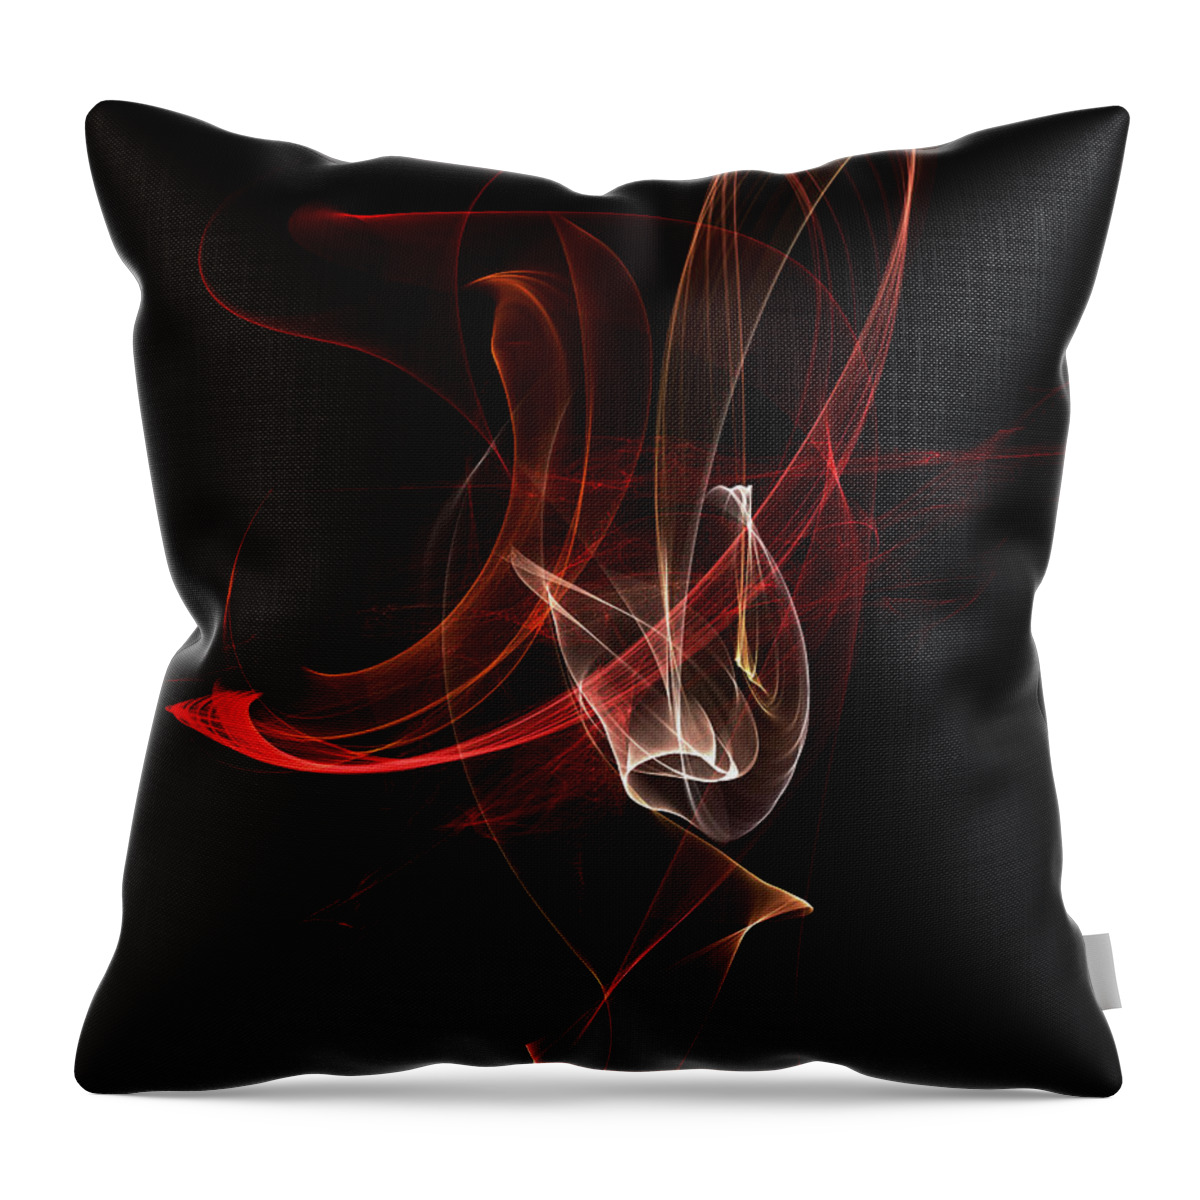 Abstract Throw Pillow featuring the digital art Abstract 01 by Gordon Engebretson